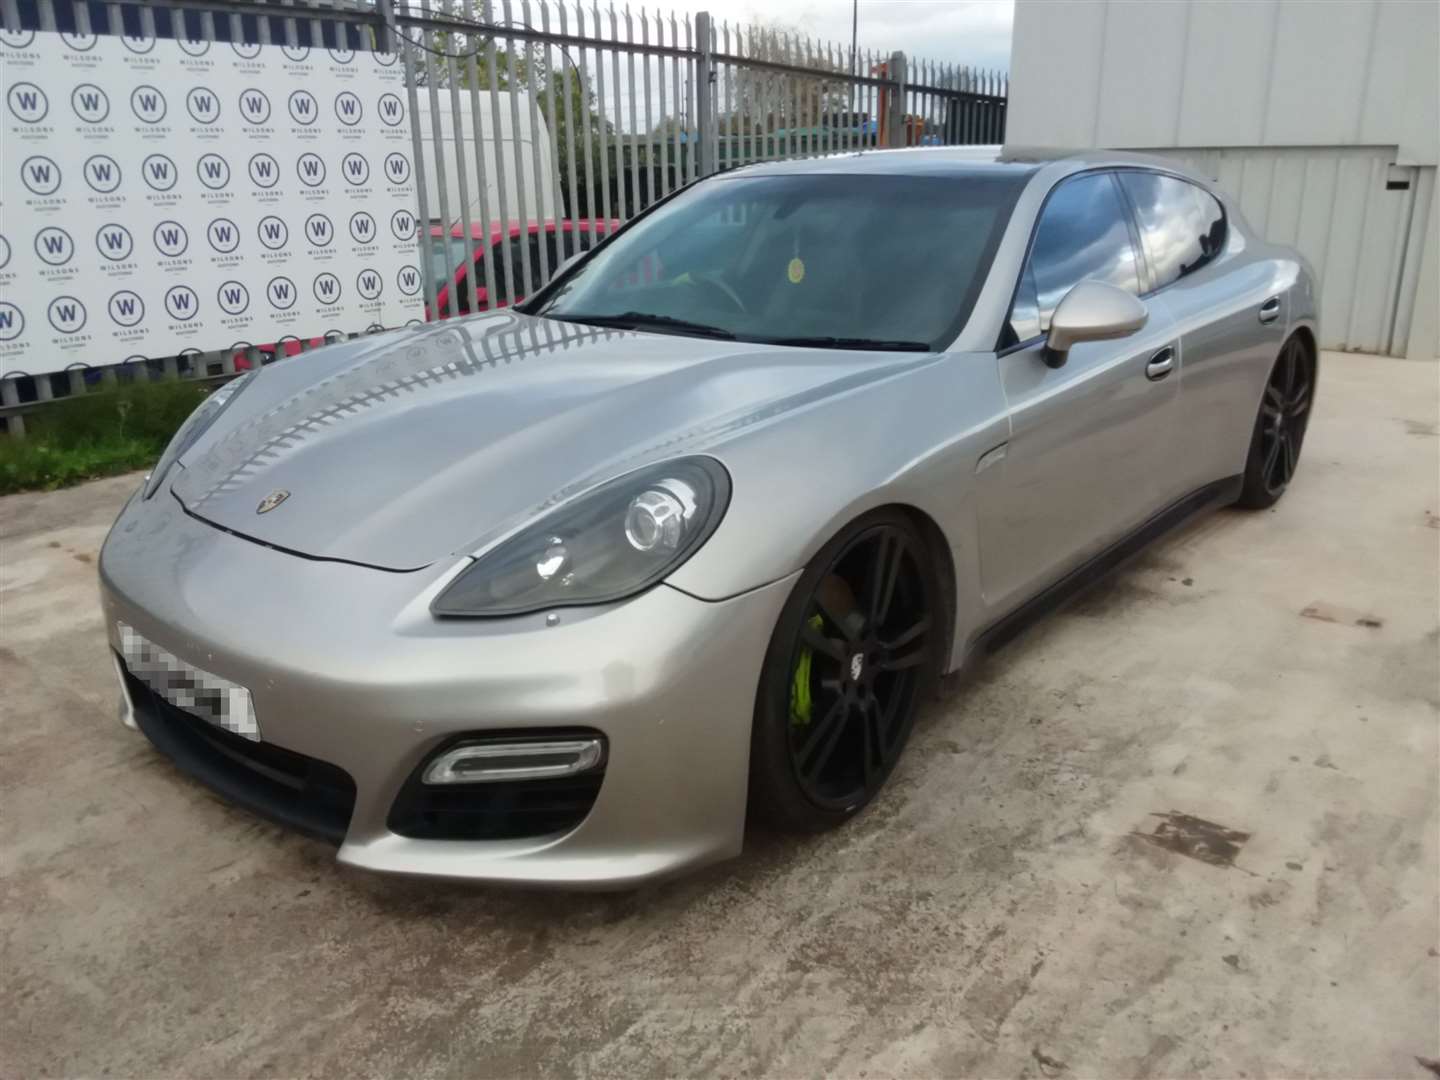 The Porsche was seized by police. Picture: Kent Police